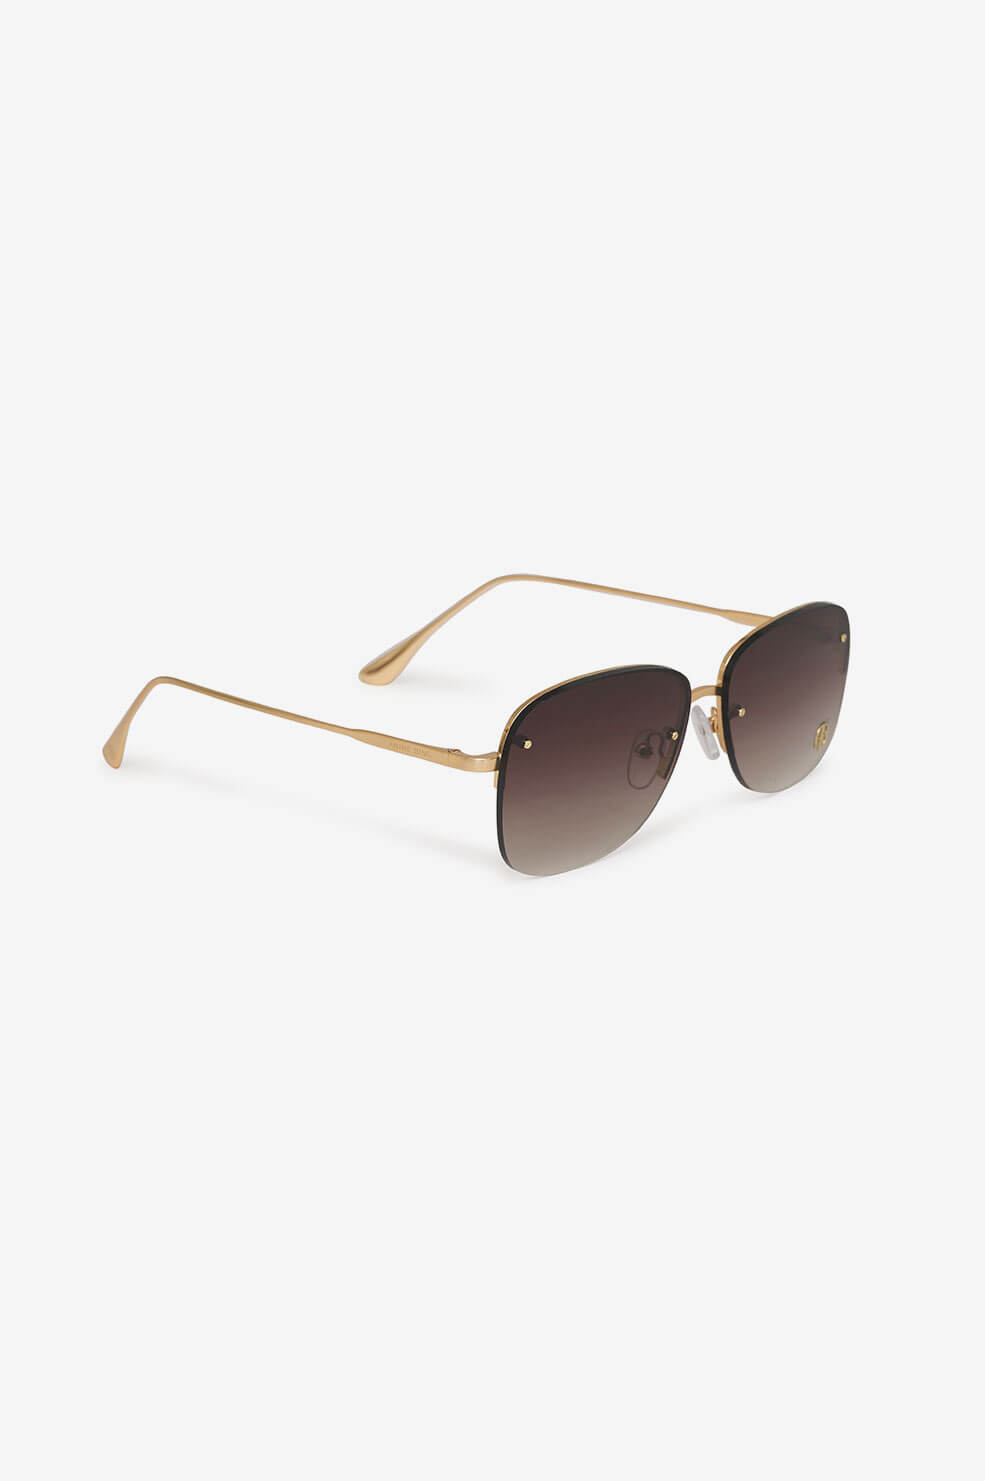 Anine Bing - Beverly Sunglasses in Brown